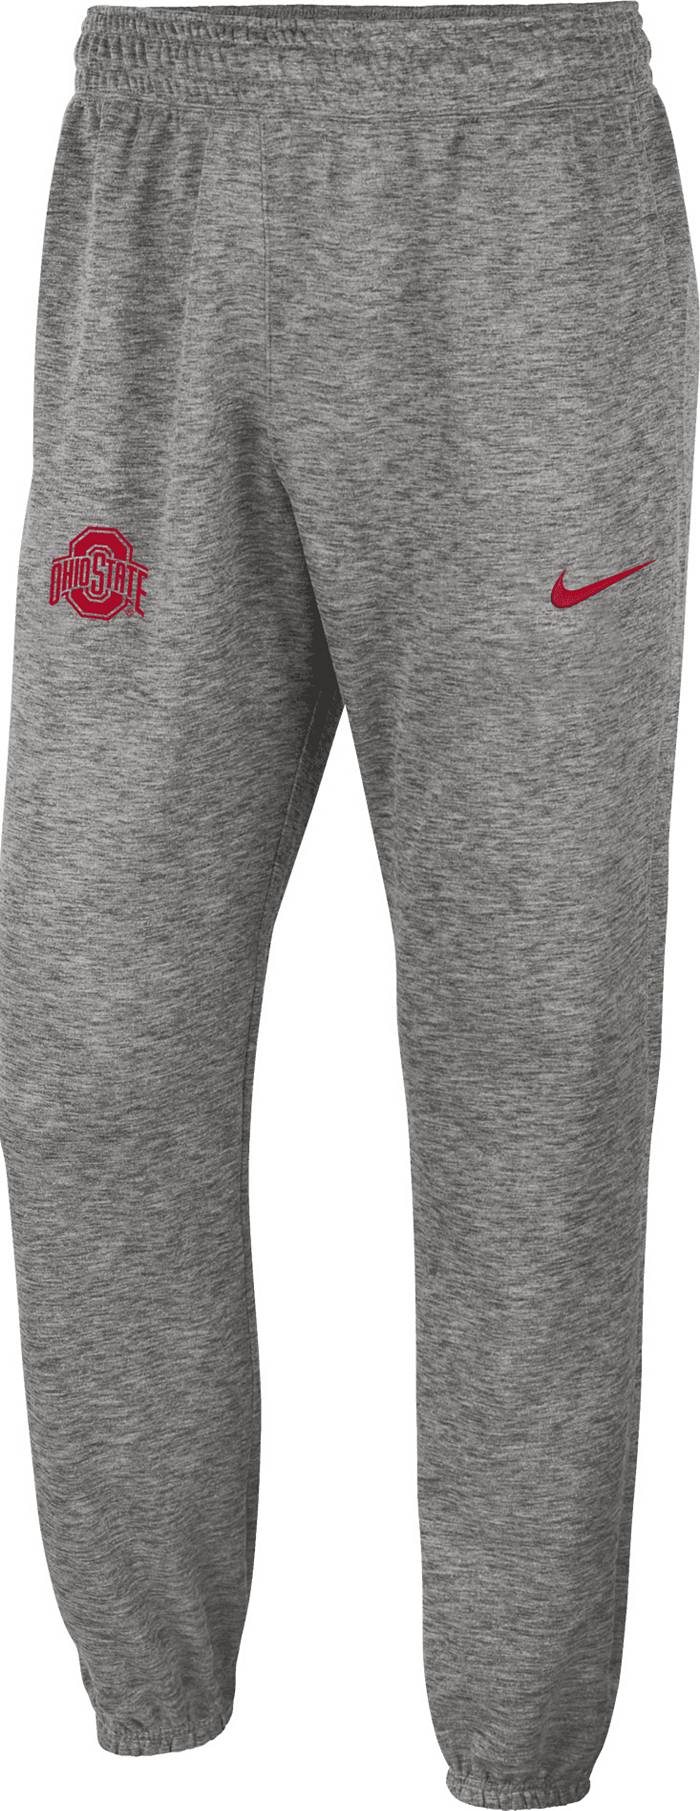 Concepts Sport Officially Licensed NCAA Mainstream Ladies' Joggers - Ohio State - Gray/Grey - Size Large